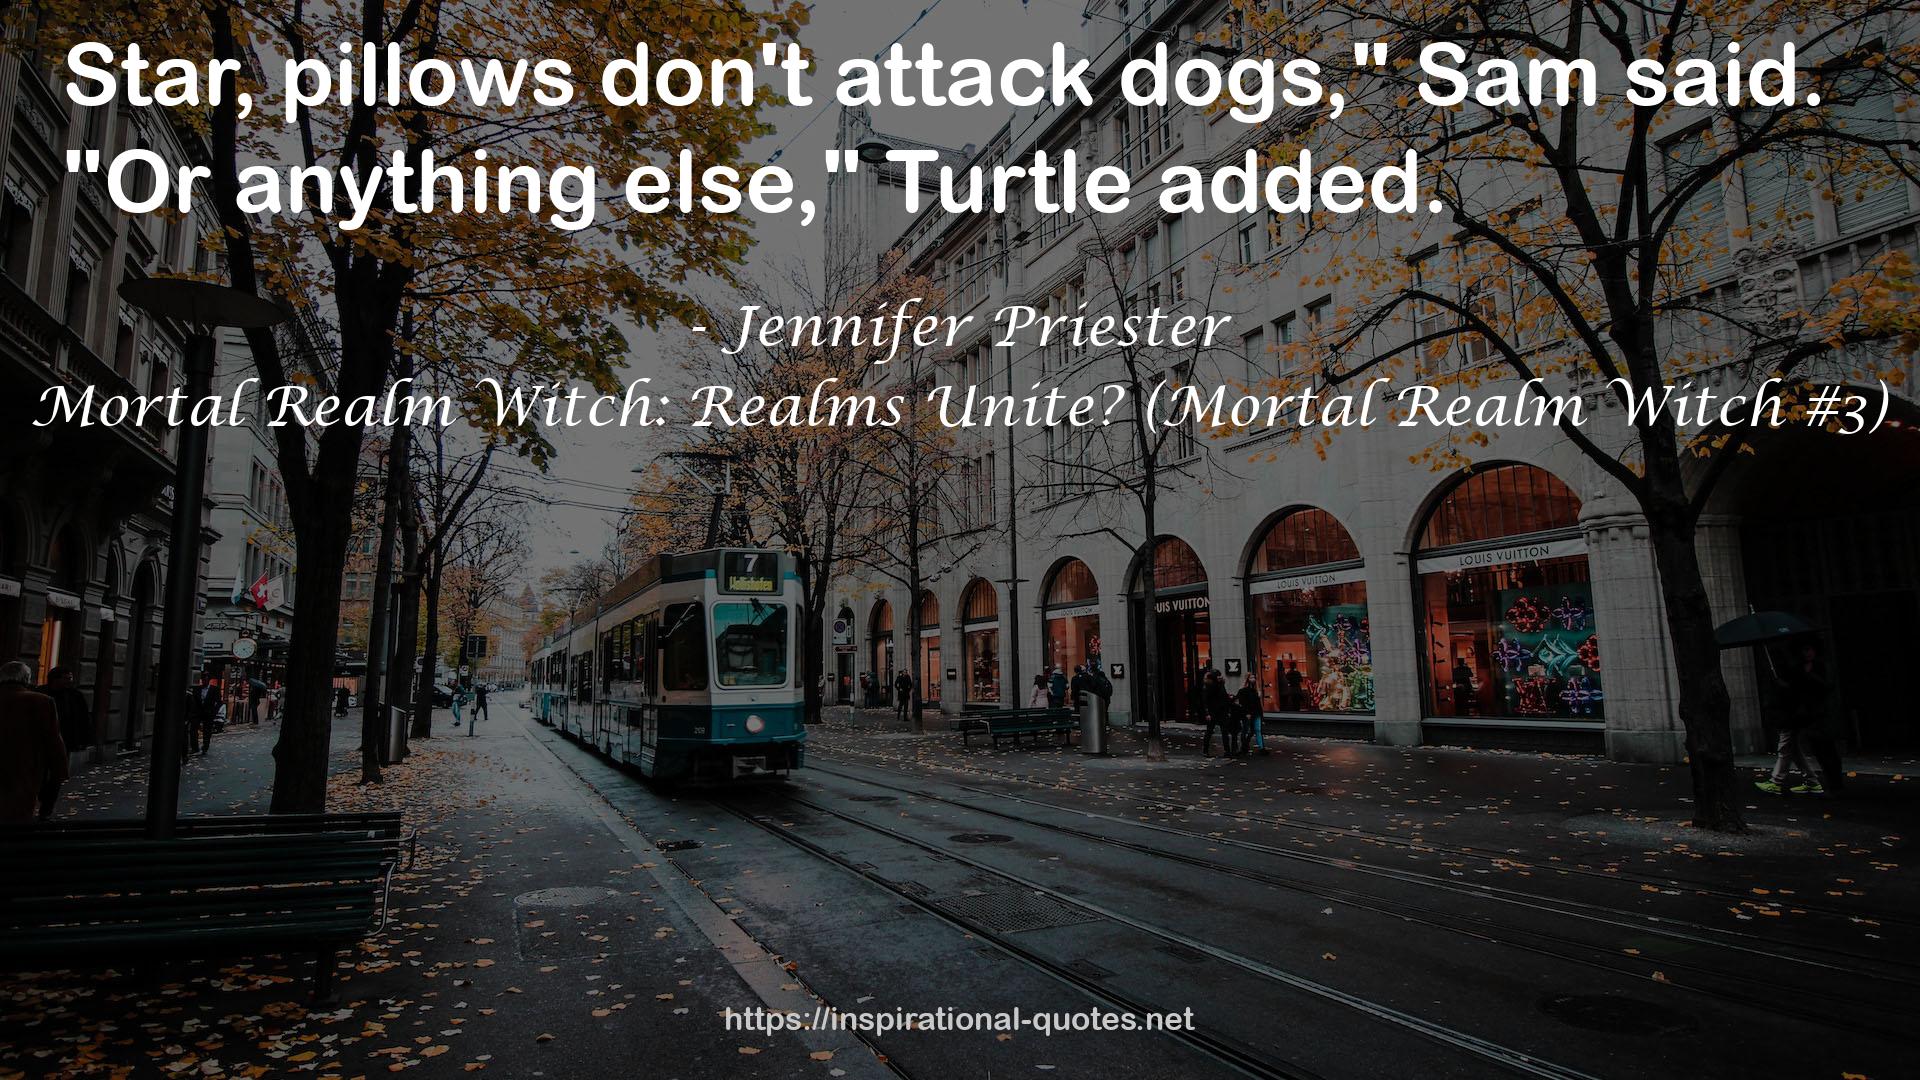 Mortal Realm Witch: Realms Unite? (Mortal Realm Witch #3) QUOTES